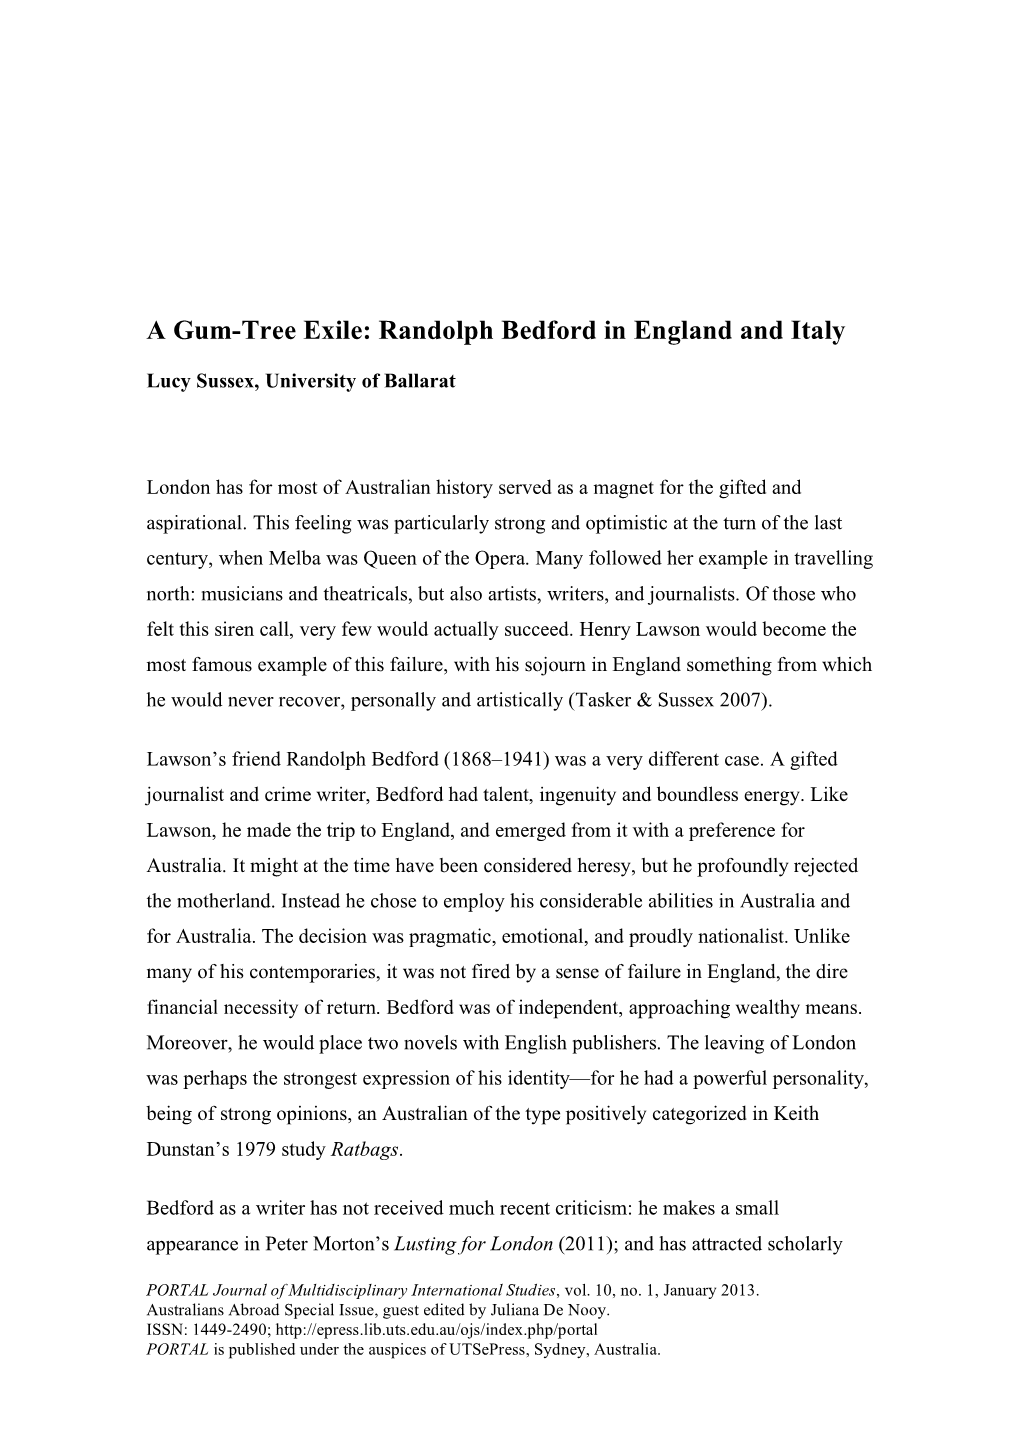 A Gum-Tree Exile: Randolph Bedford in England and Italy